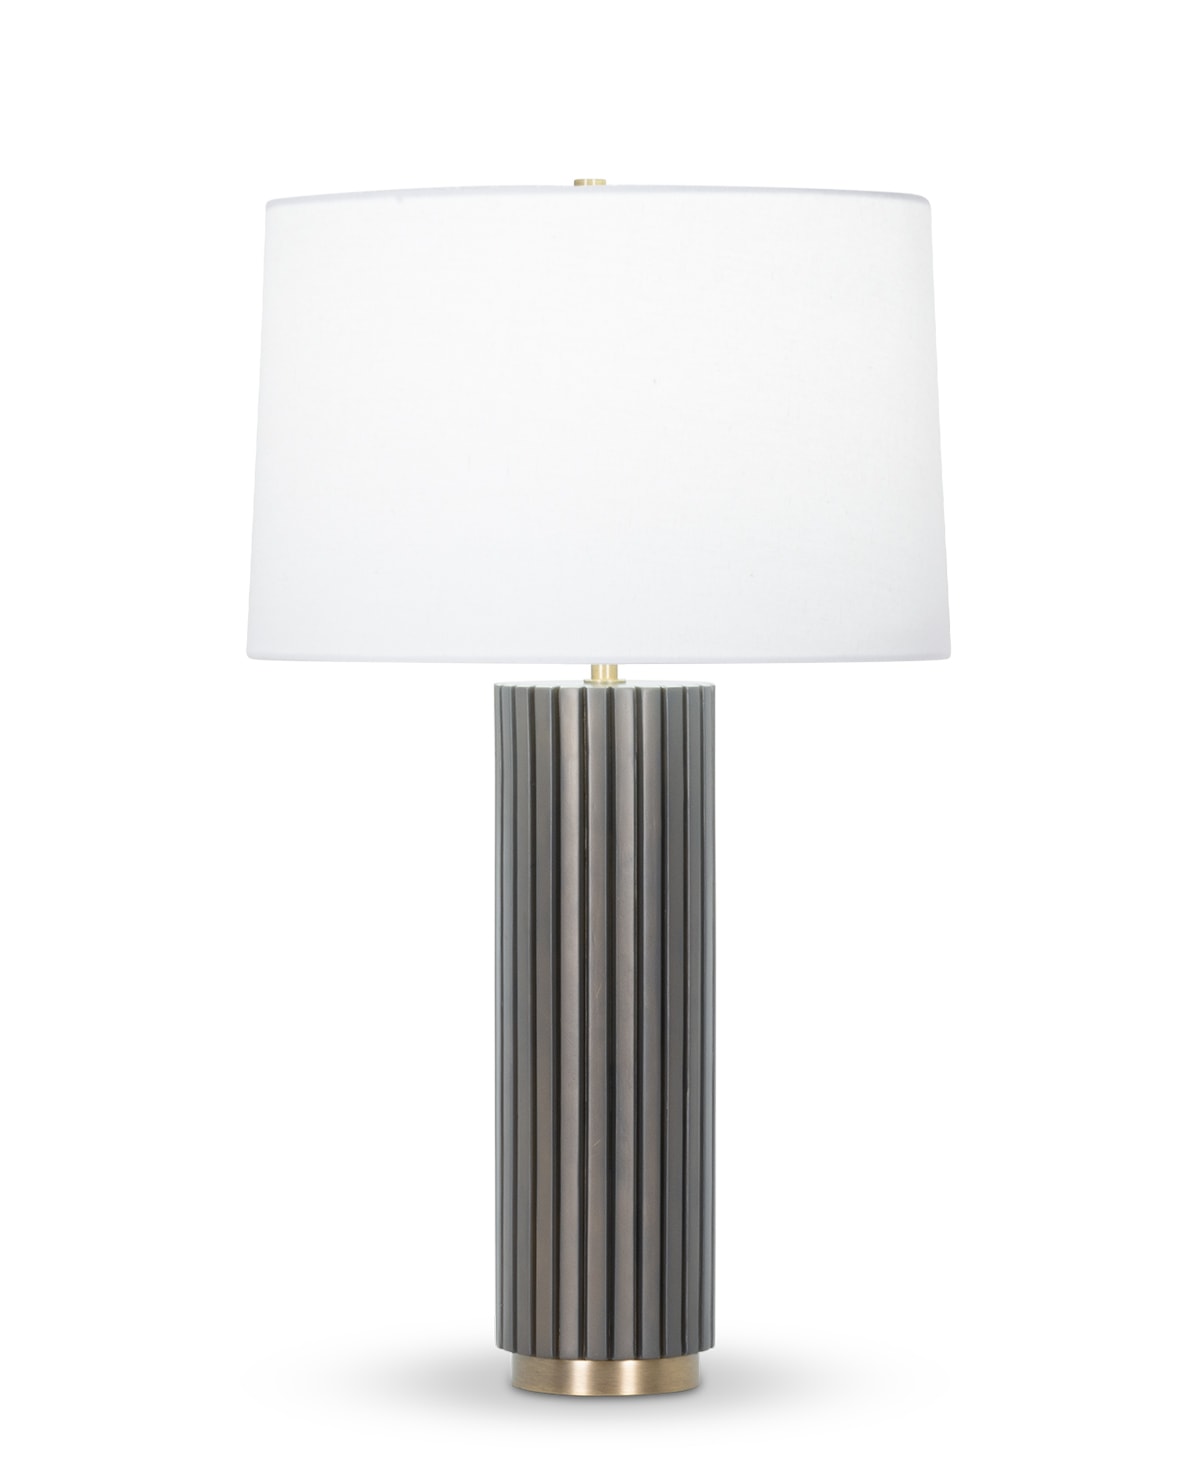 FlowDecor Meredith Table Lamp in resin with dark brown finish and metal with antique brass finish and off-white cotton tapered drum shade (# 4440)